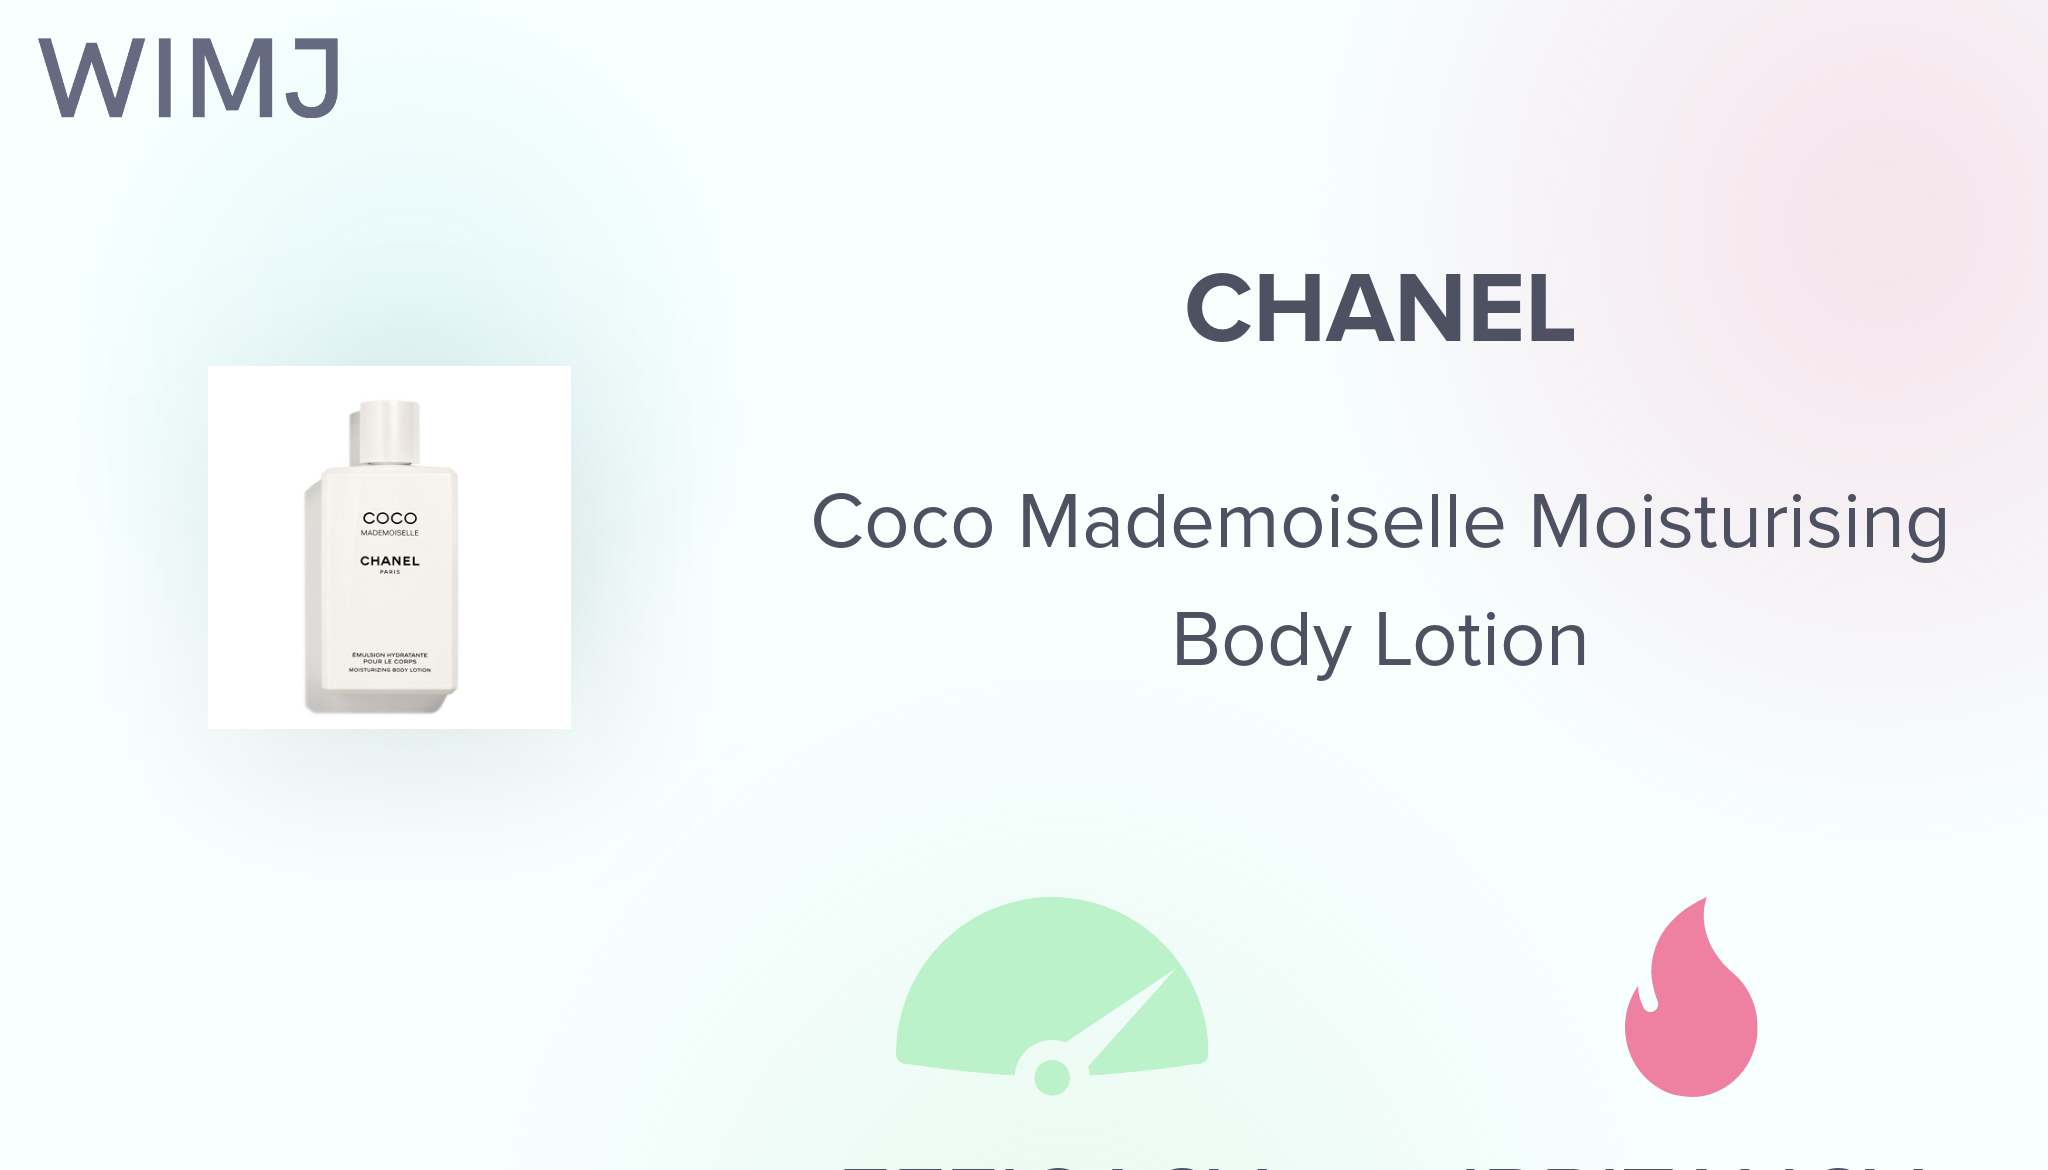 Review: CHANEL - Coco Mademoiselle Moisturising Body Lotion - WIMJ